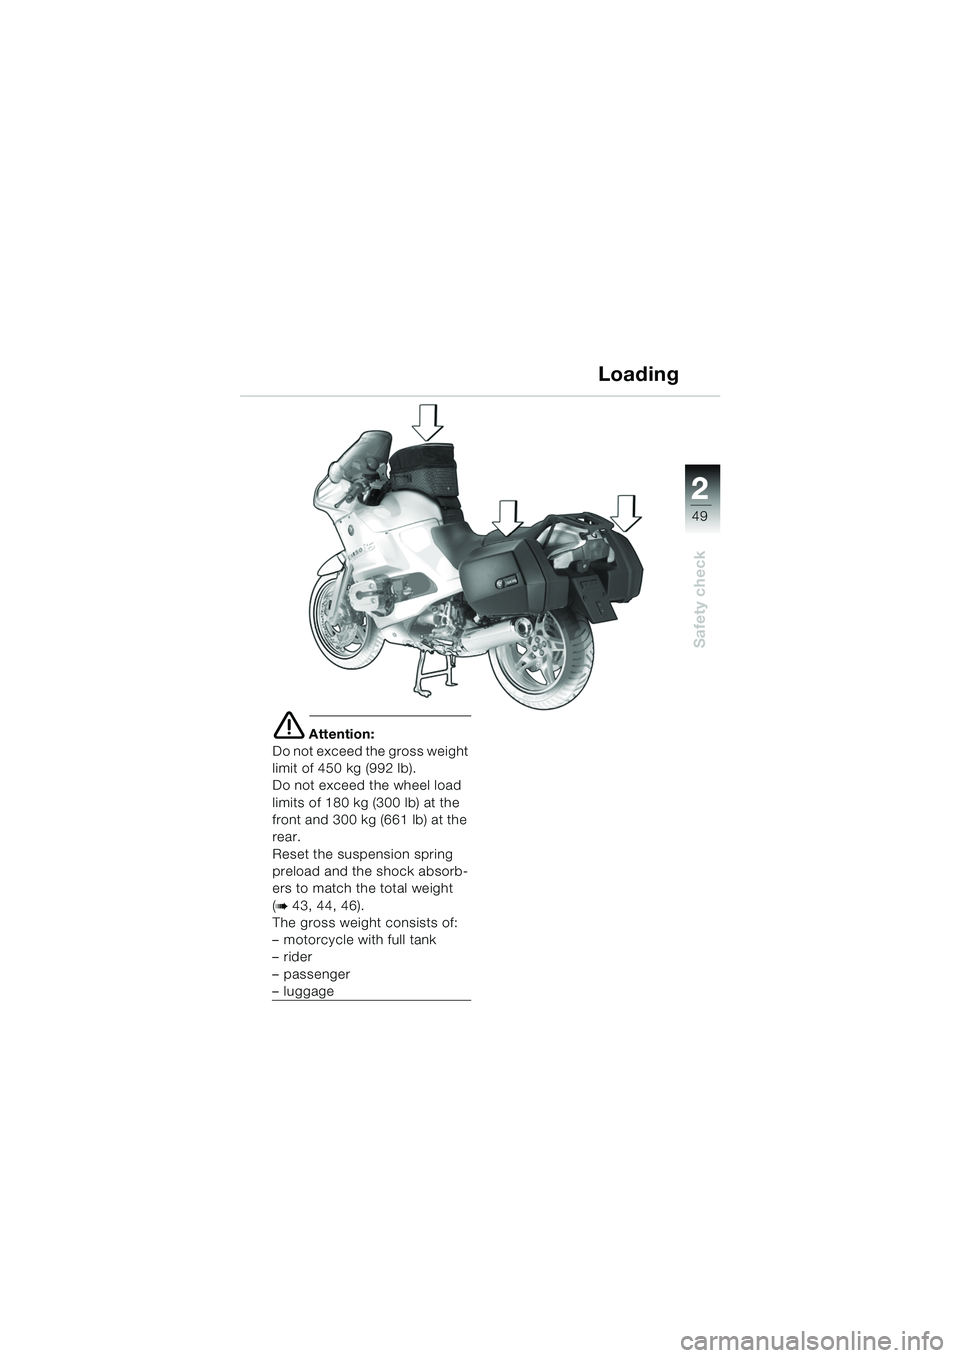 BMW MOTORRAD R 1150 RS 2002  Riders Manual (in English) 2
49
2
Safety check
e Attention:
Do not exceed the gross weight 
limit of 450 kg (992 lb).
Do not exceed the wheel load 
limits of 180 kg (300 lb) at the 
front and 300 kg (661 lb) at the 
rear.
Reset